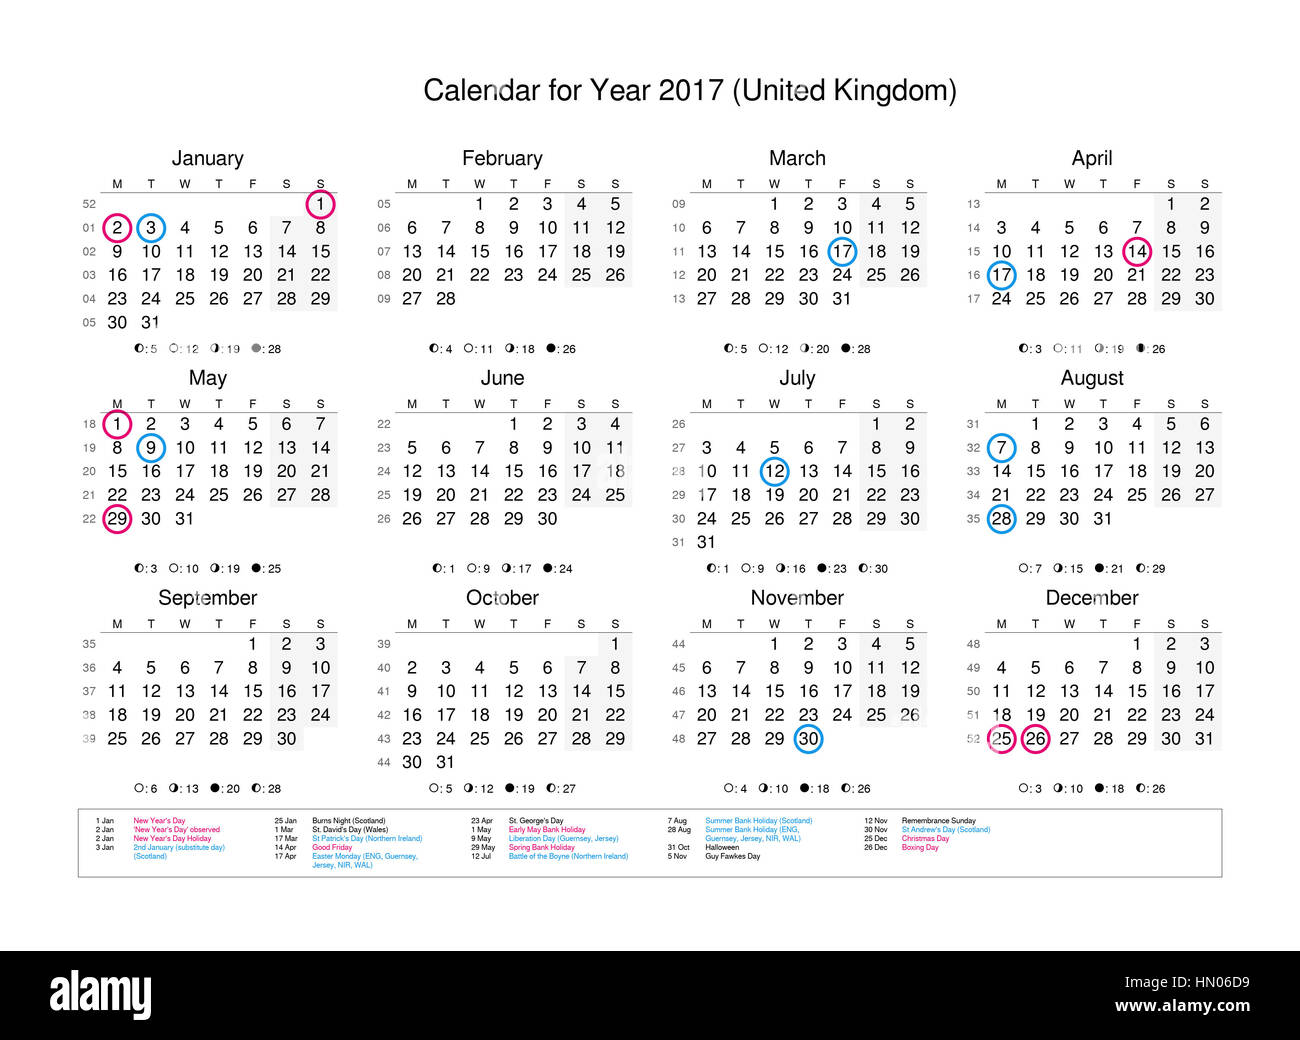 Calendar of year 2017 with public holidays and bank holidays for UK (England) Stock Photo